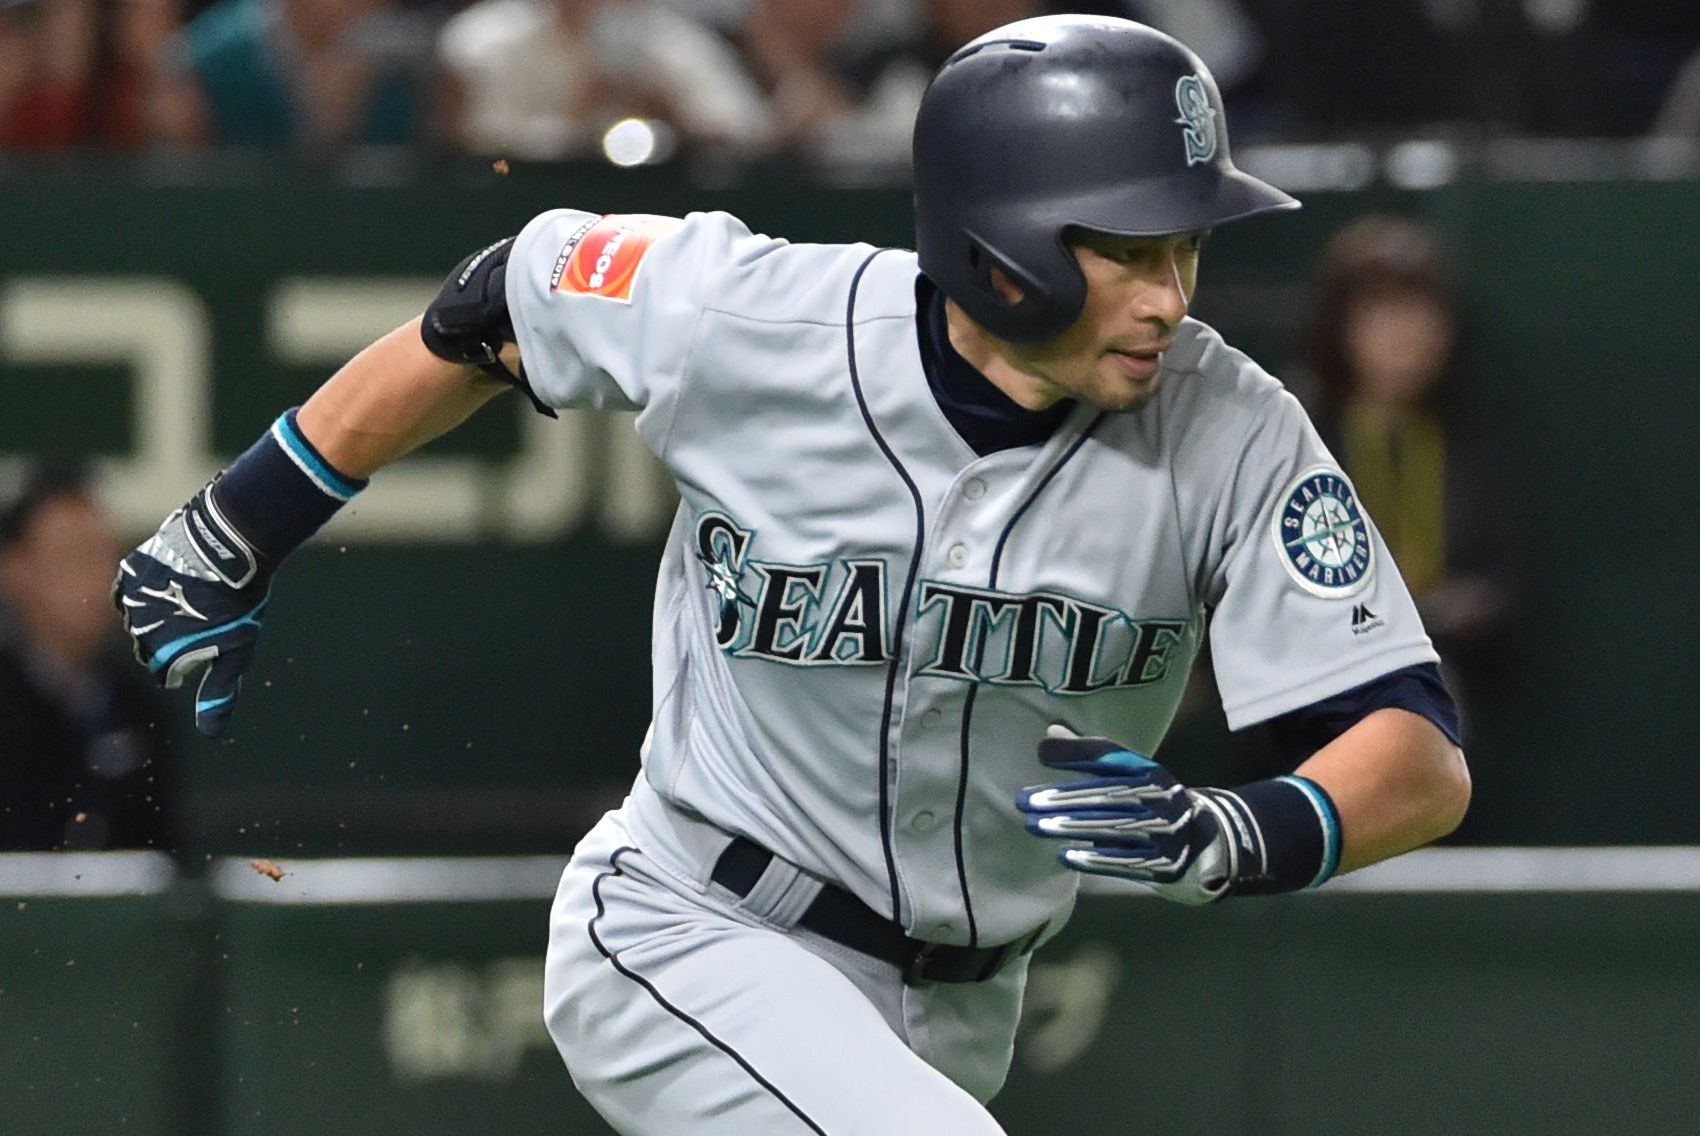 Ichiro retires: Seattle Mariners star closes out 19-year MLB